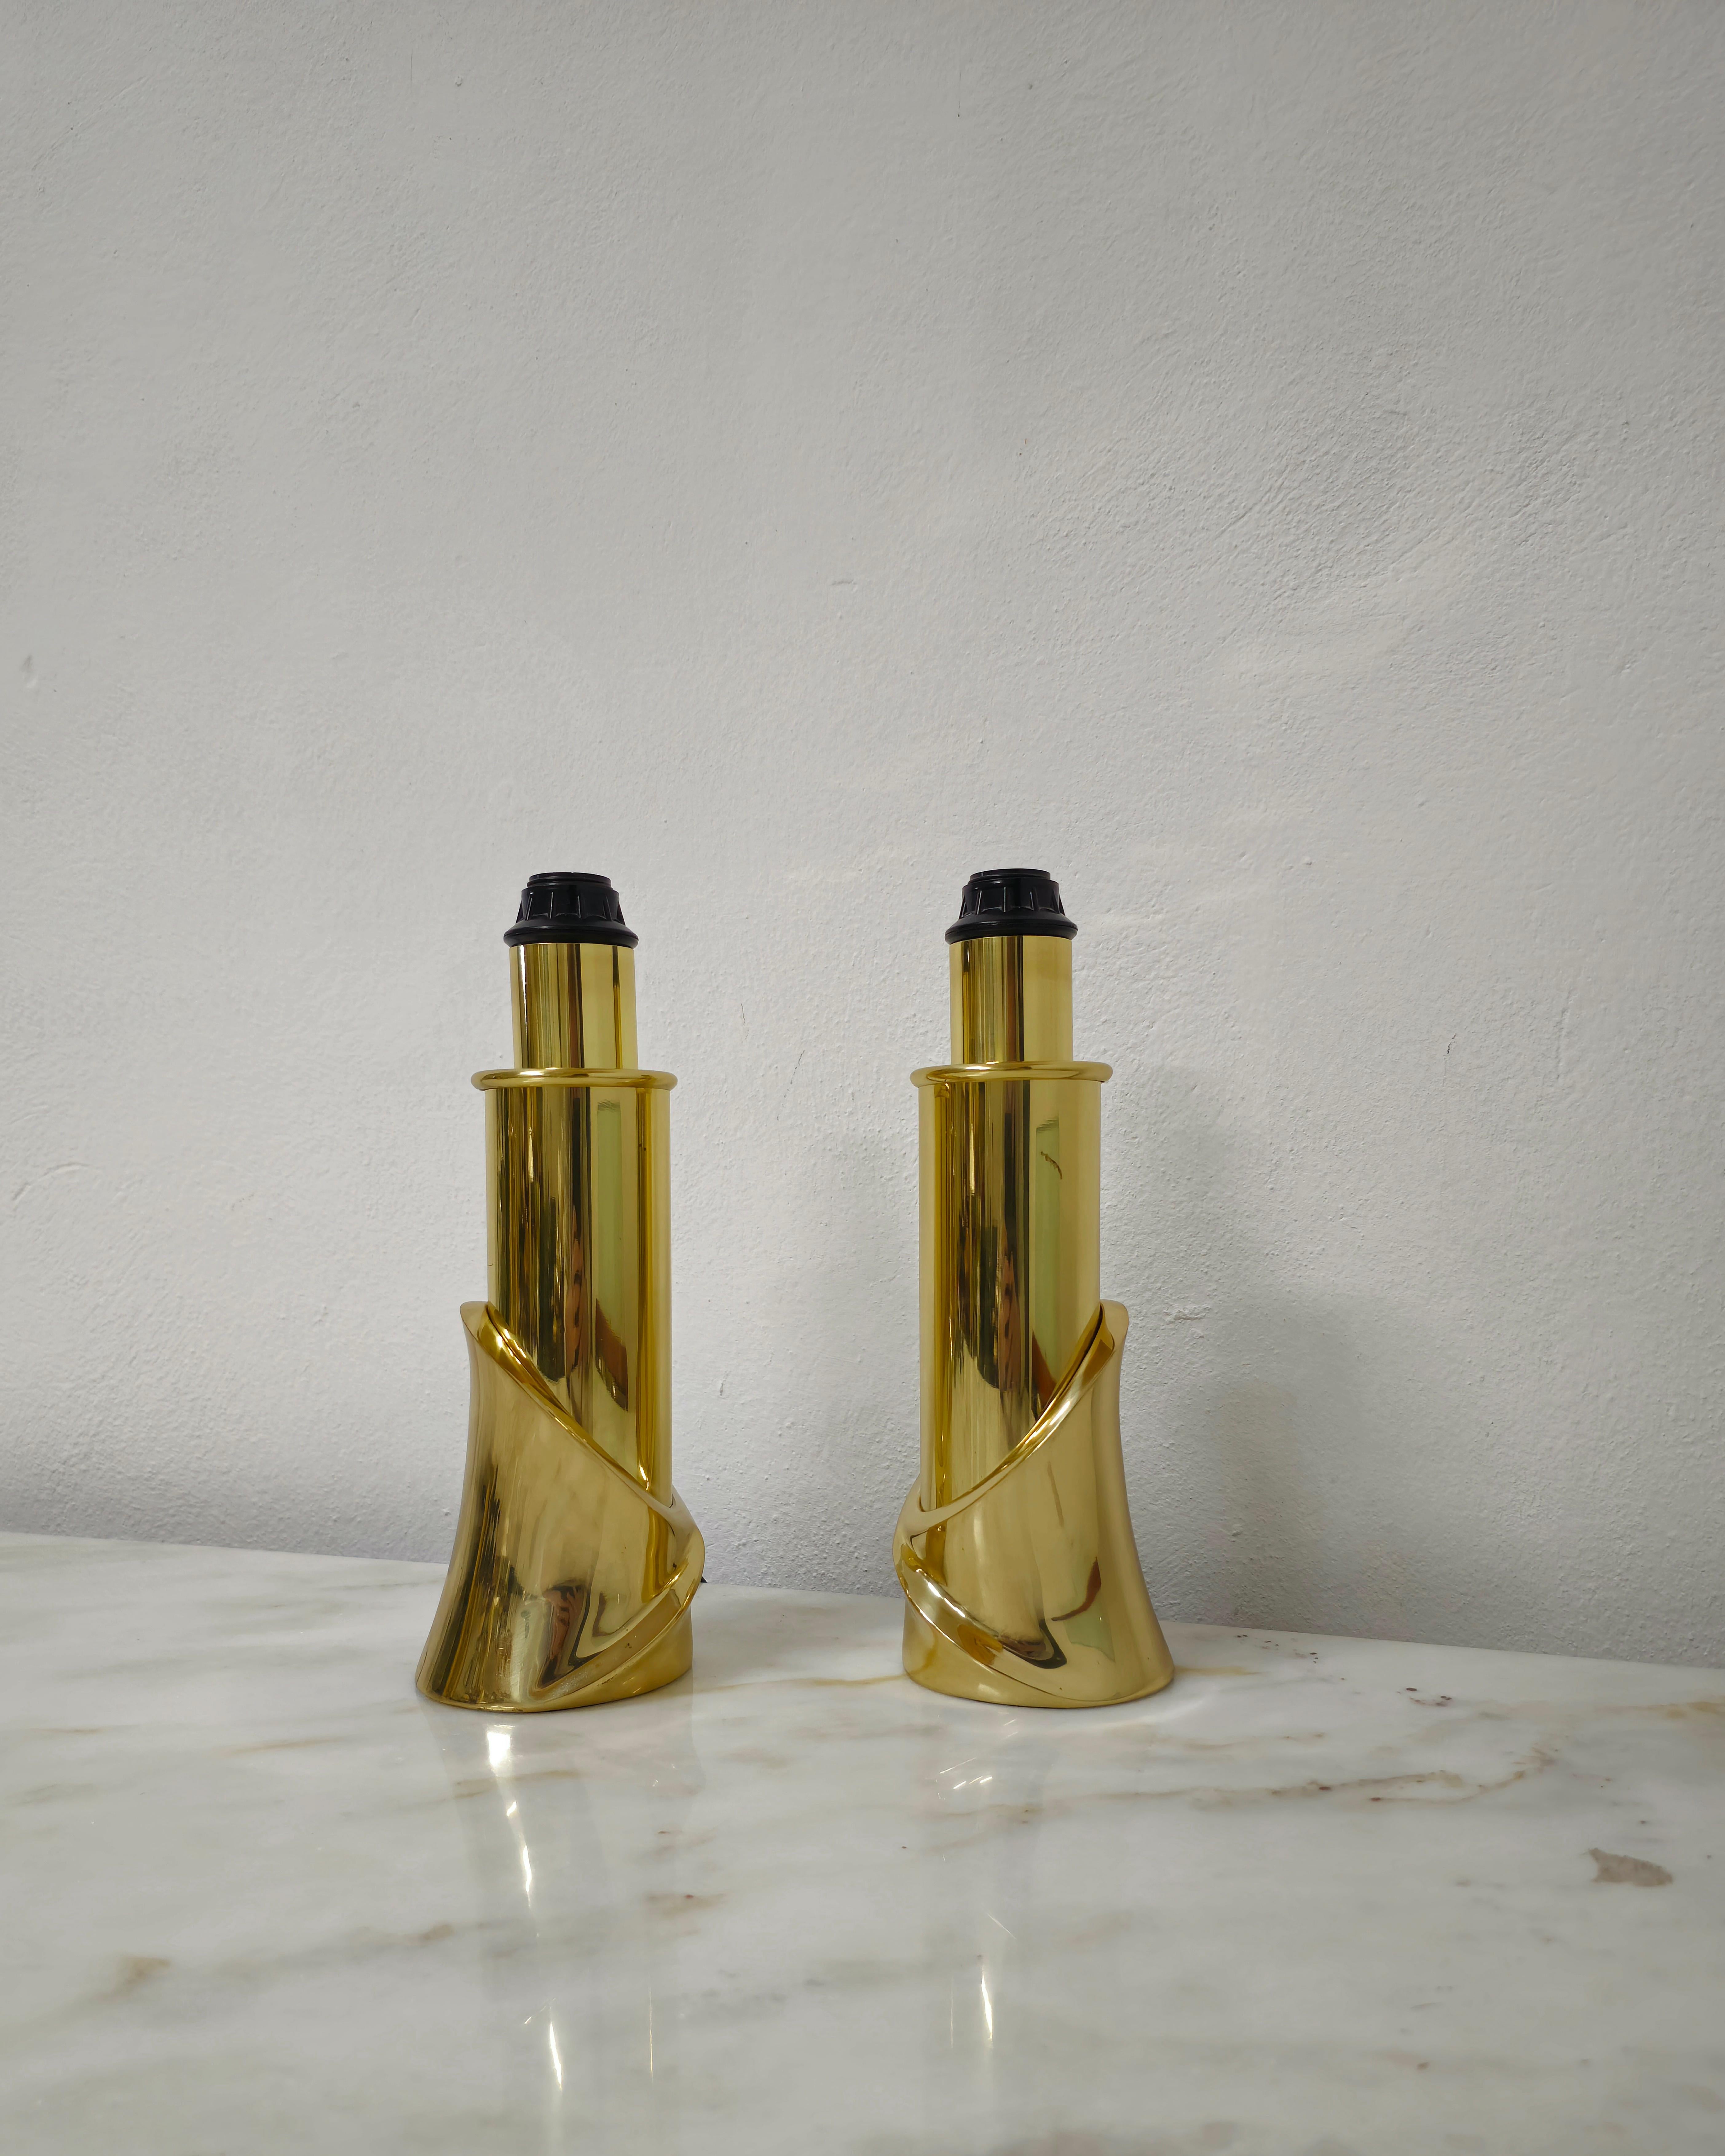 Amazing set of 2 bedside or table lamps designed by the renowned Italian designer Luciano Frigerio and produced in Italy in the 1970s. Each individual sculptural lamp with a particular shape was made of polished and solid brass.



Note: We try to